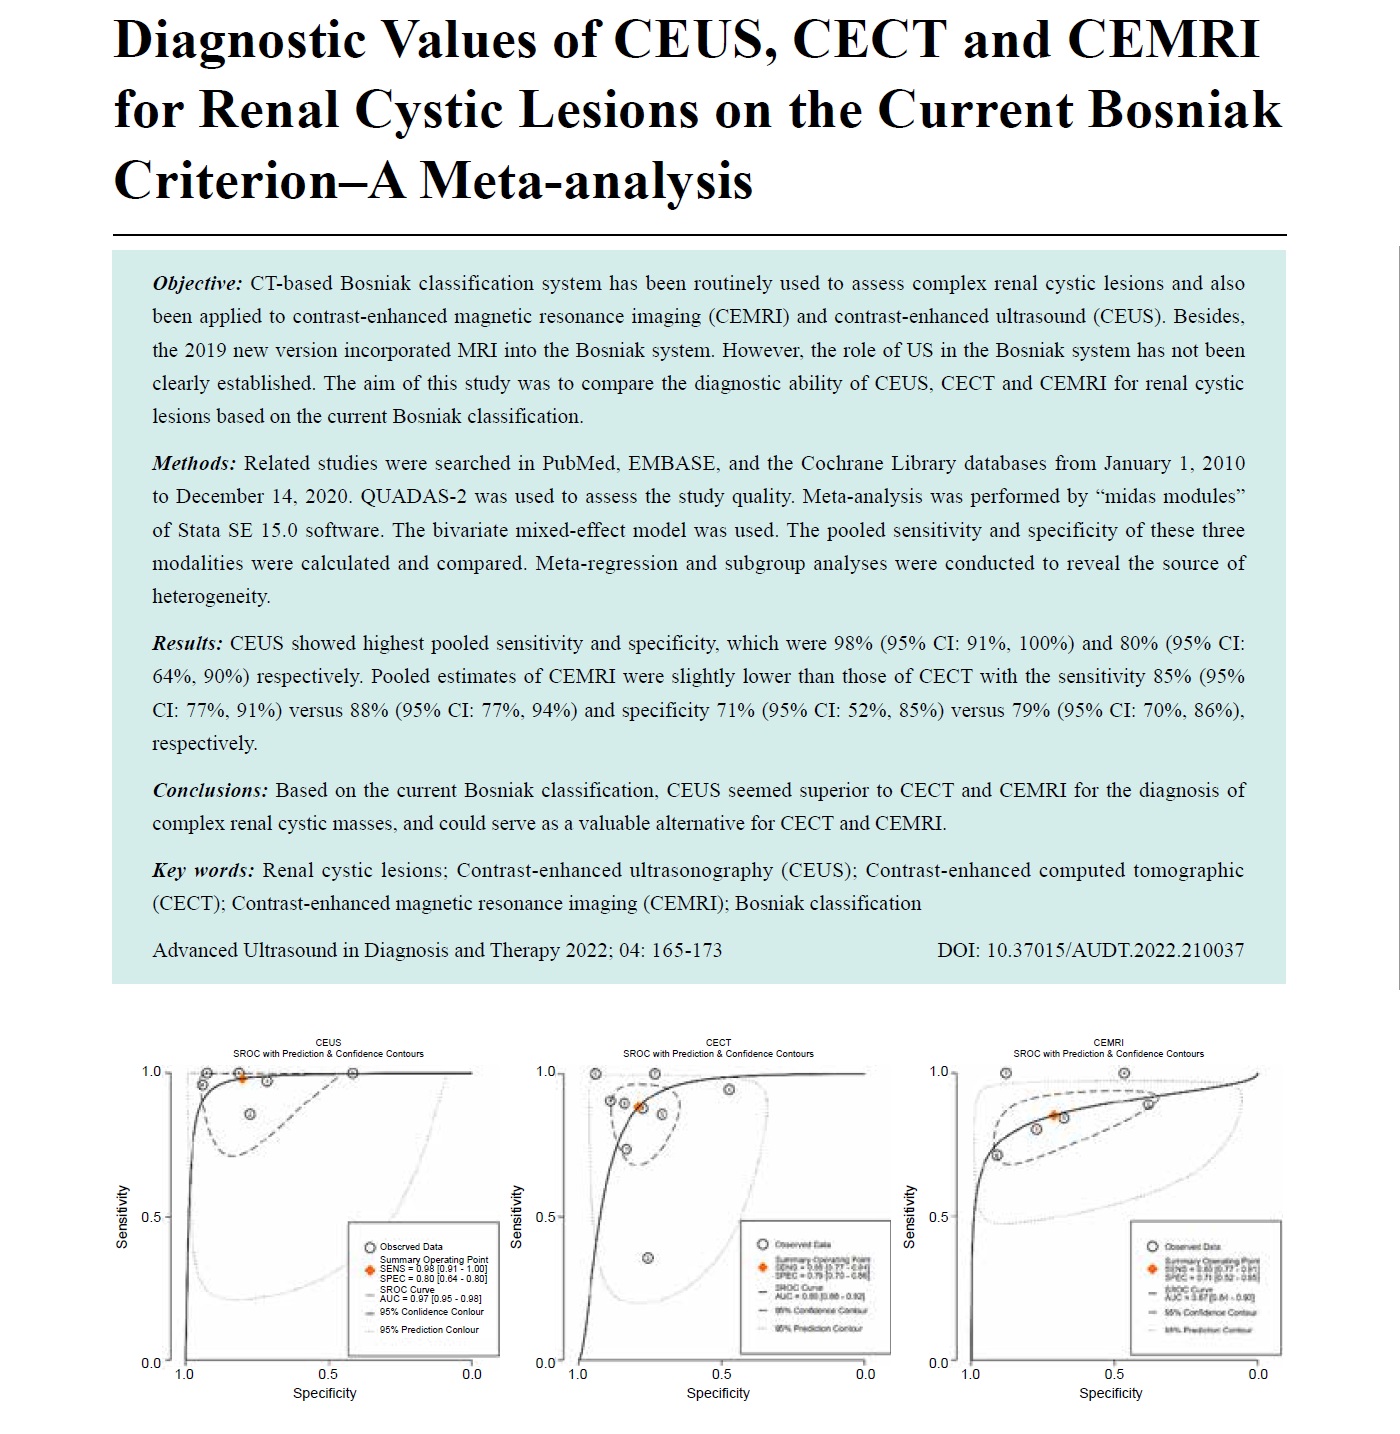 Diagnostic Values of CEUS, CECT and CEMRI for Renal Cystic Lesions on the Current Bosniak Criterion-A Meta-analysi